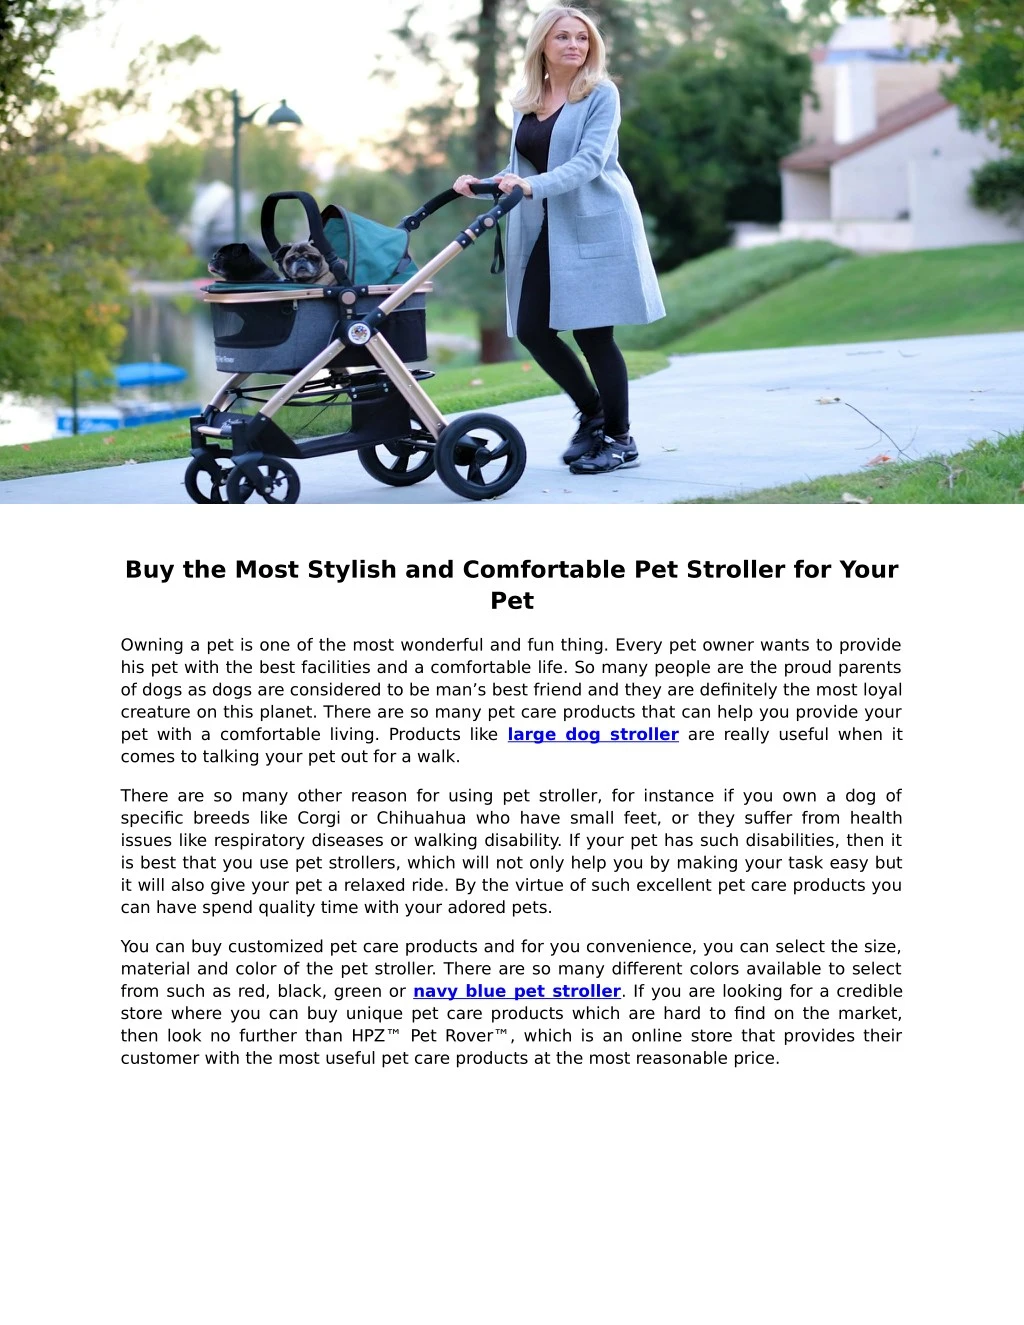 buy the most stylish and comfortable pet stroller